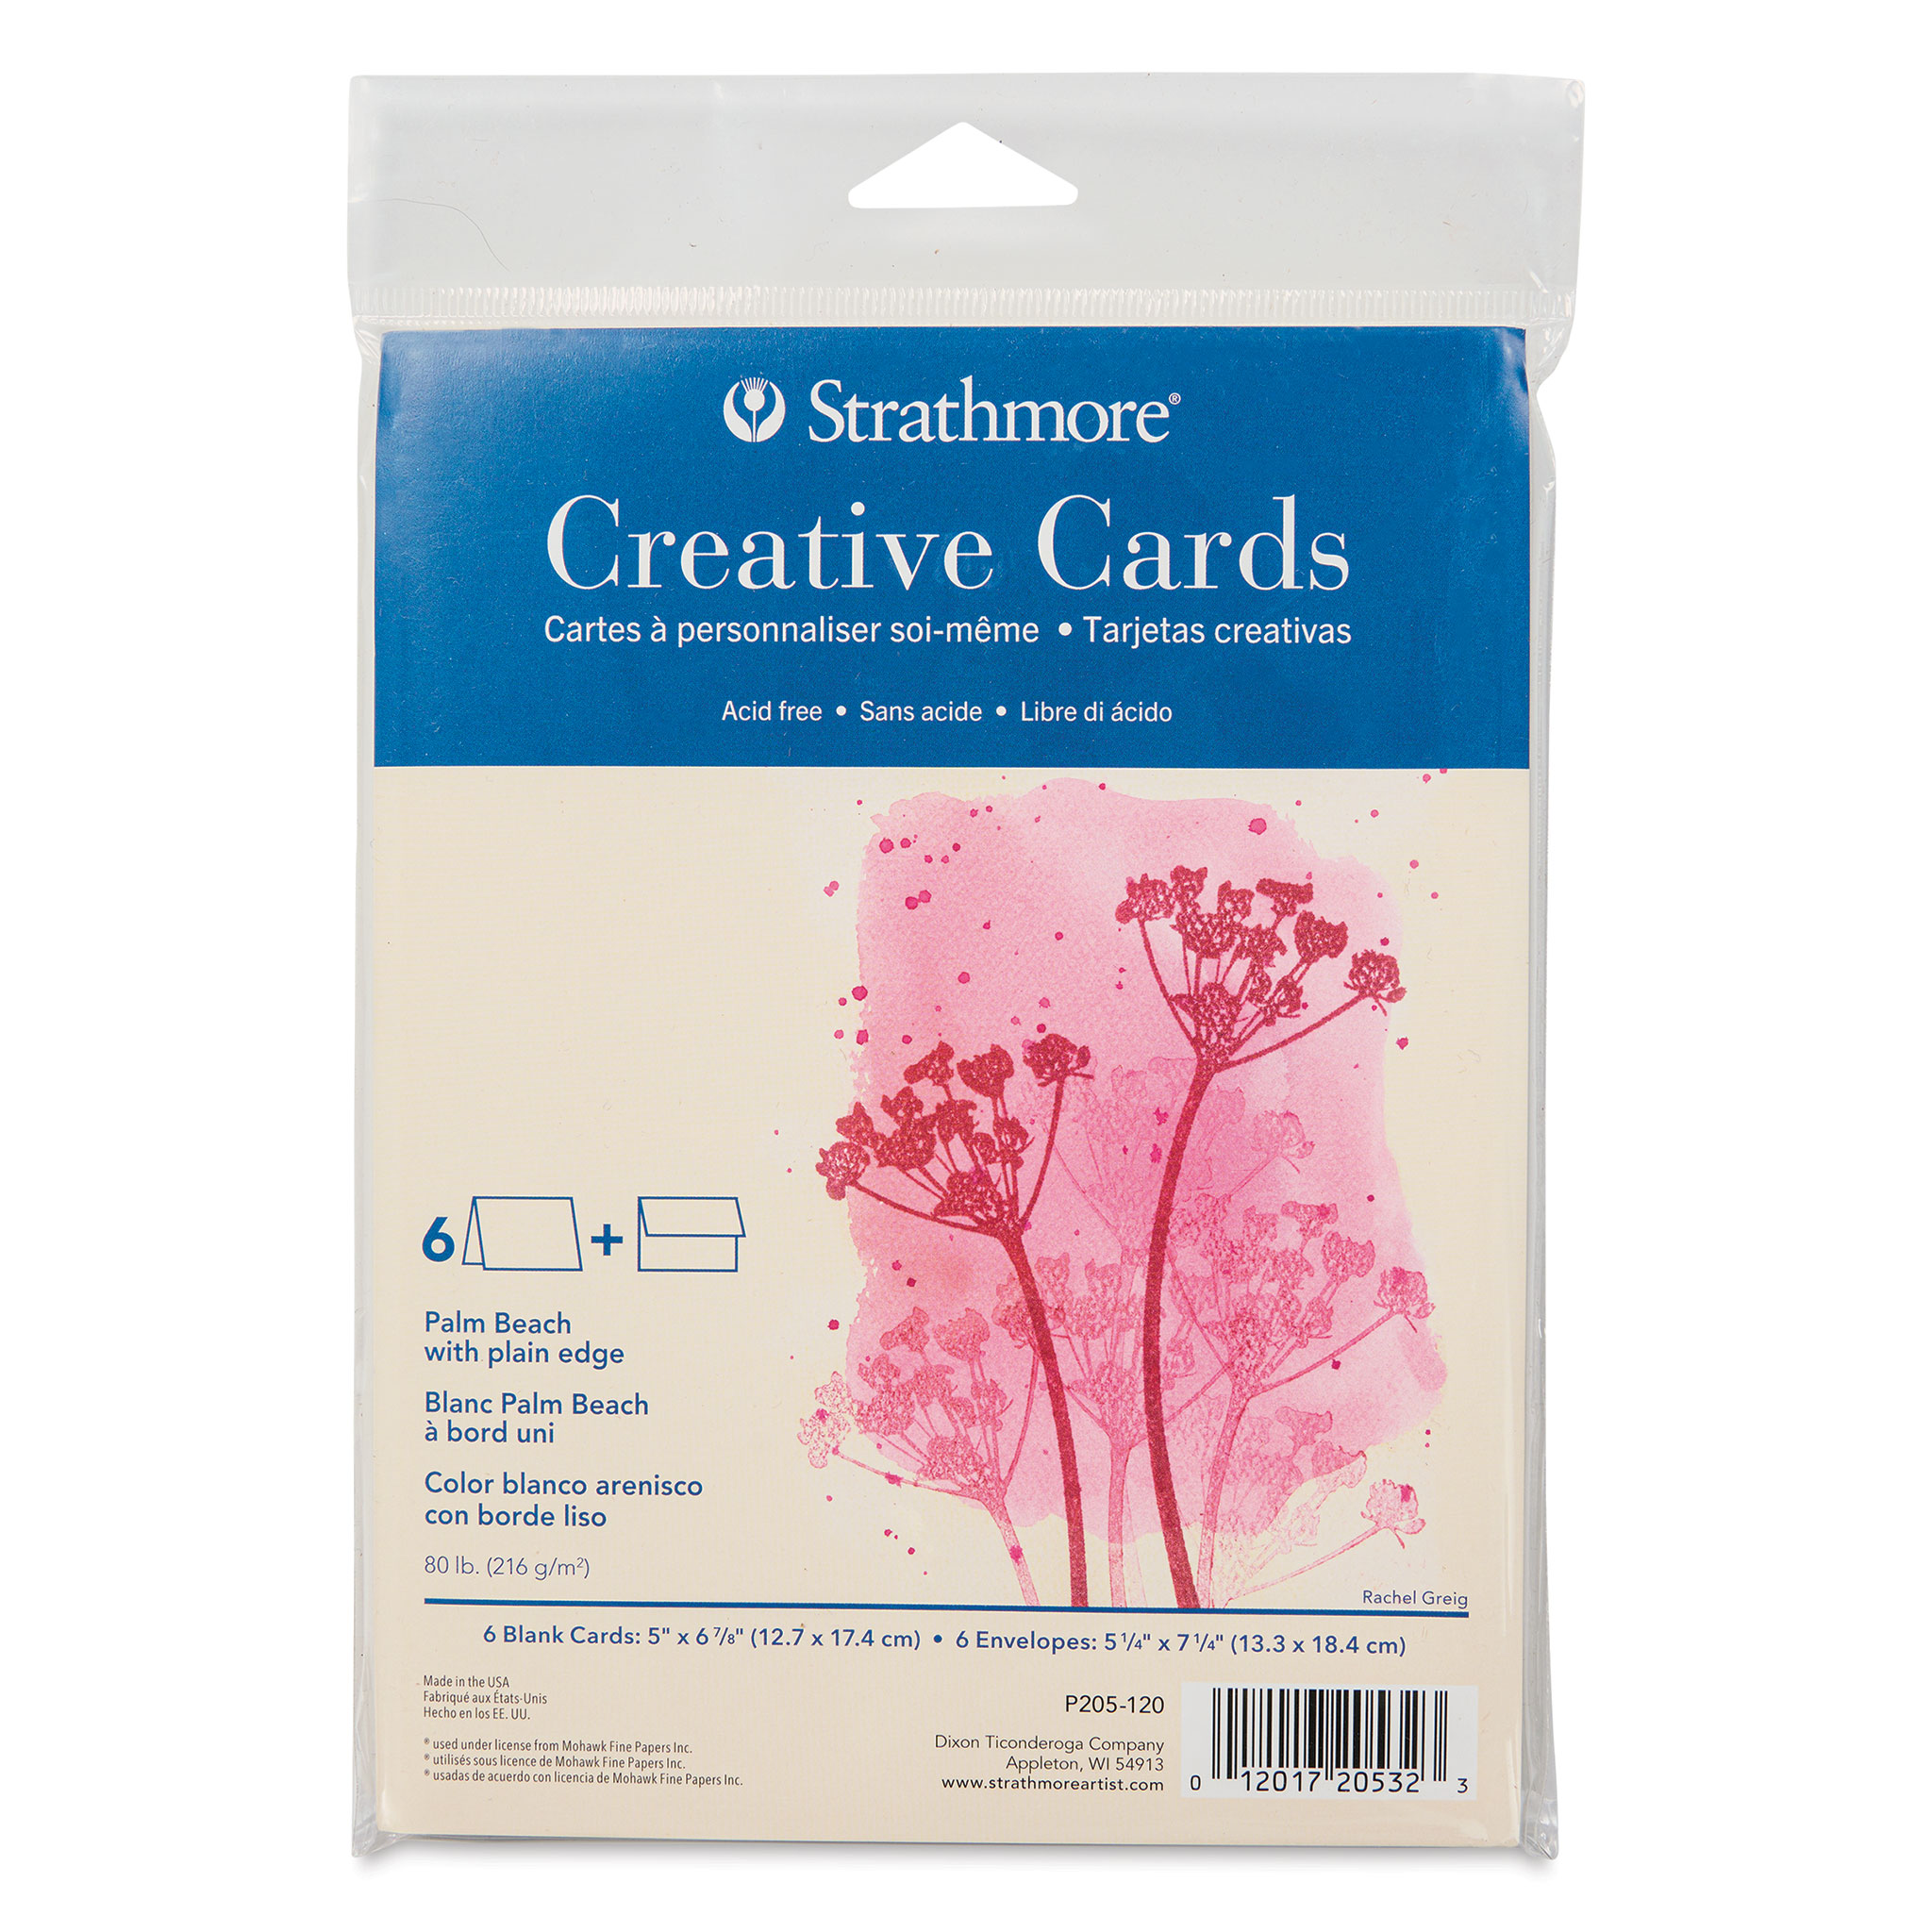 Strathmore Creative Cards and Envelopes - Full Size, Palm Beach White with  Deckle Edge, Pkg of 6